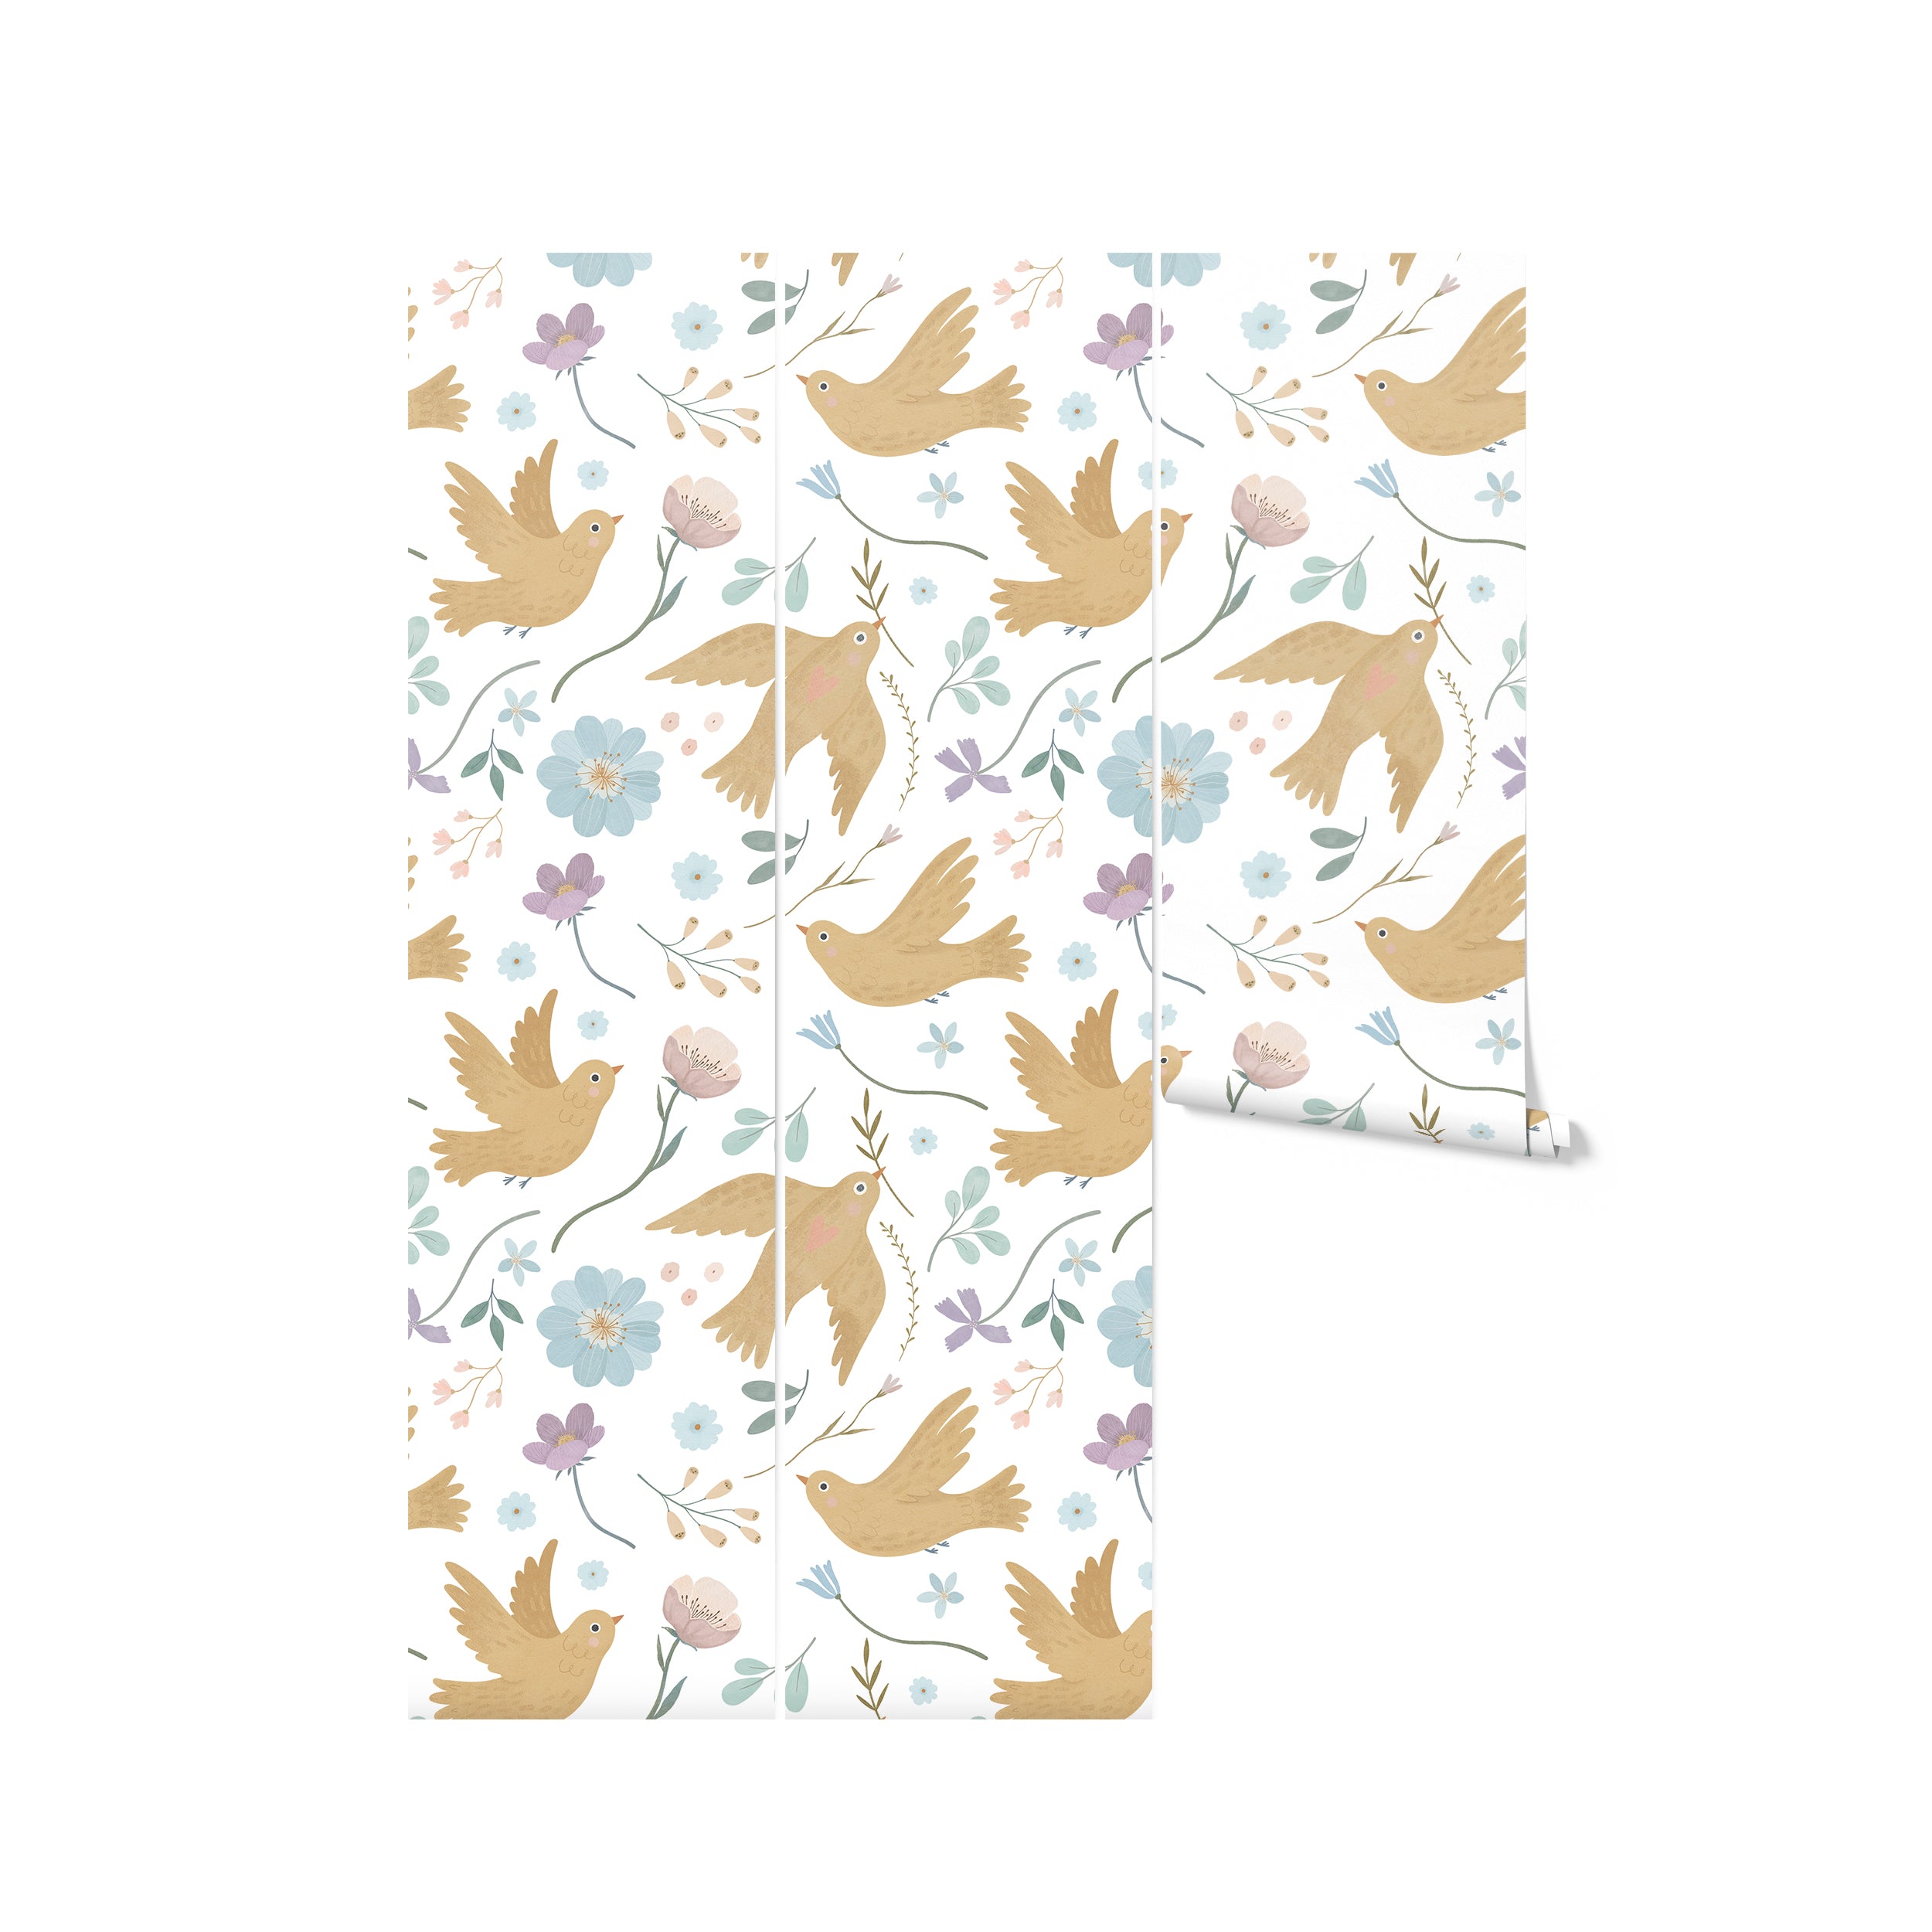 Rolls of Pastel Bird Wallpaper - Large, highlighting the charming design of tan birds, pastel flowers, and greenery on a white background, perfect for a serene and playful atmosphere.